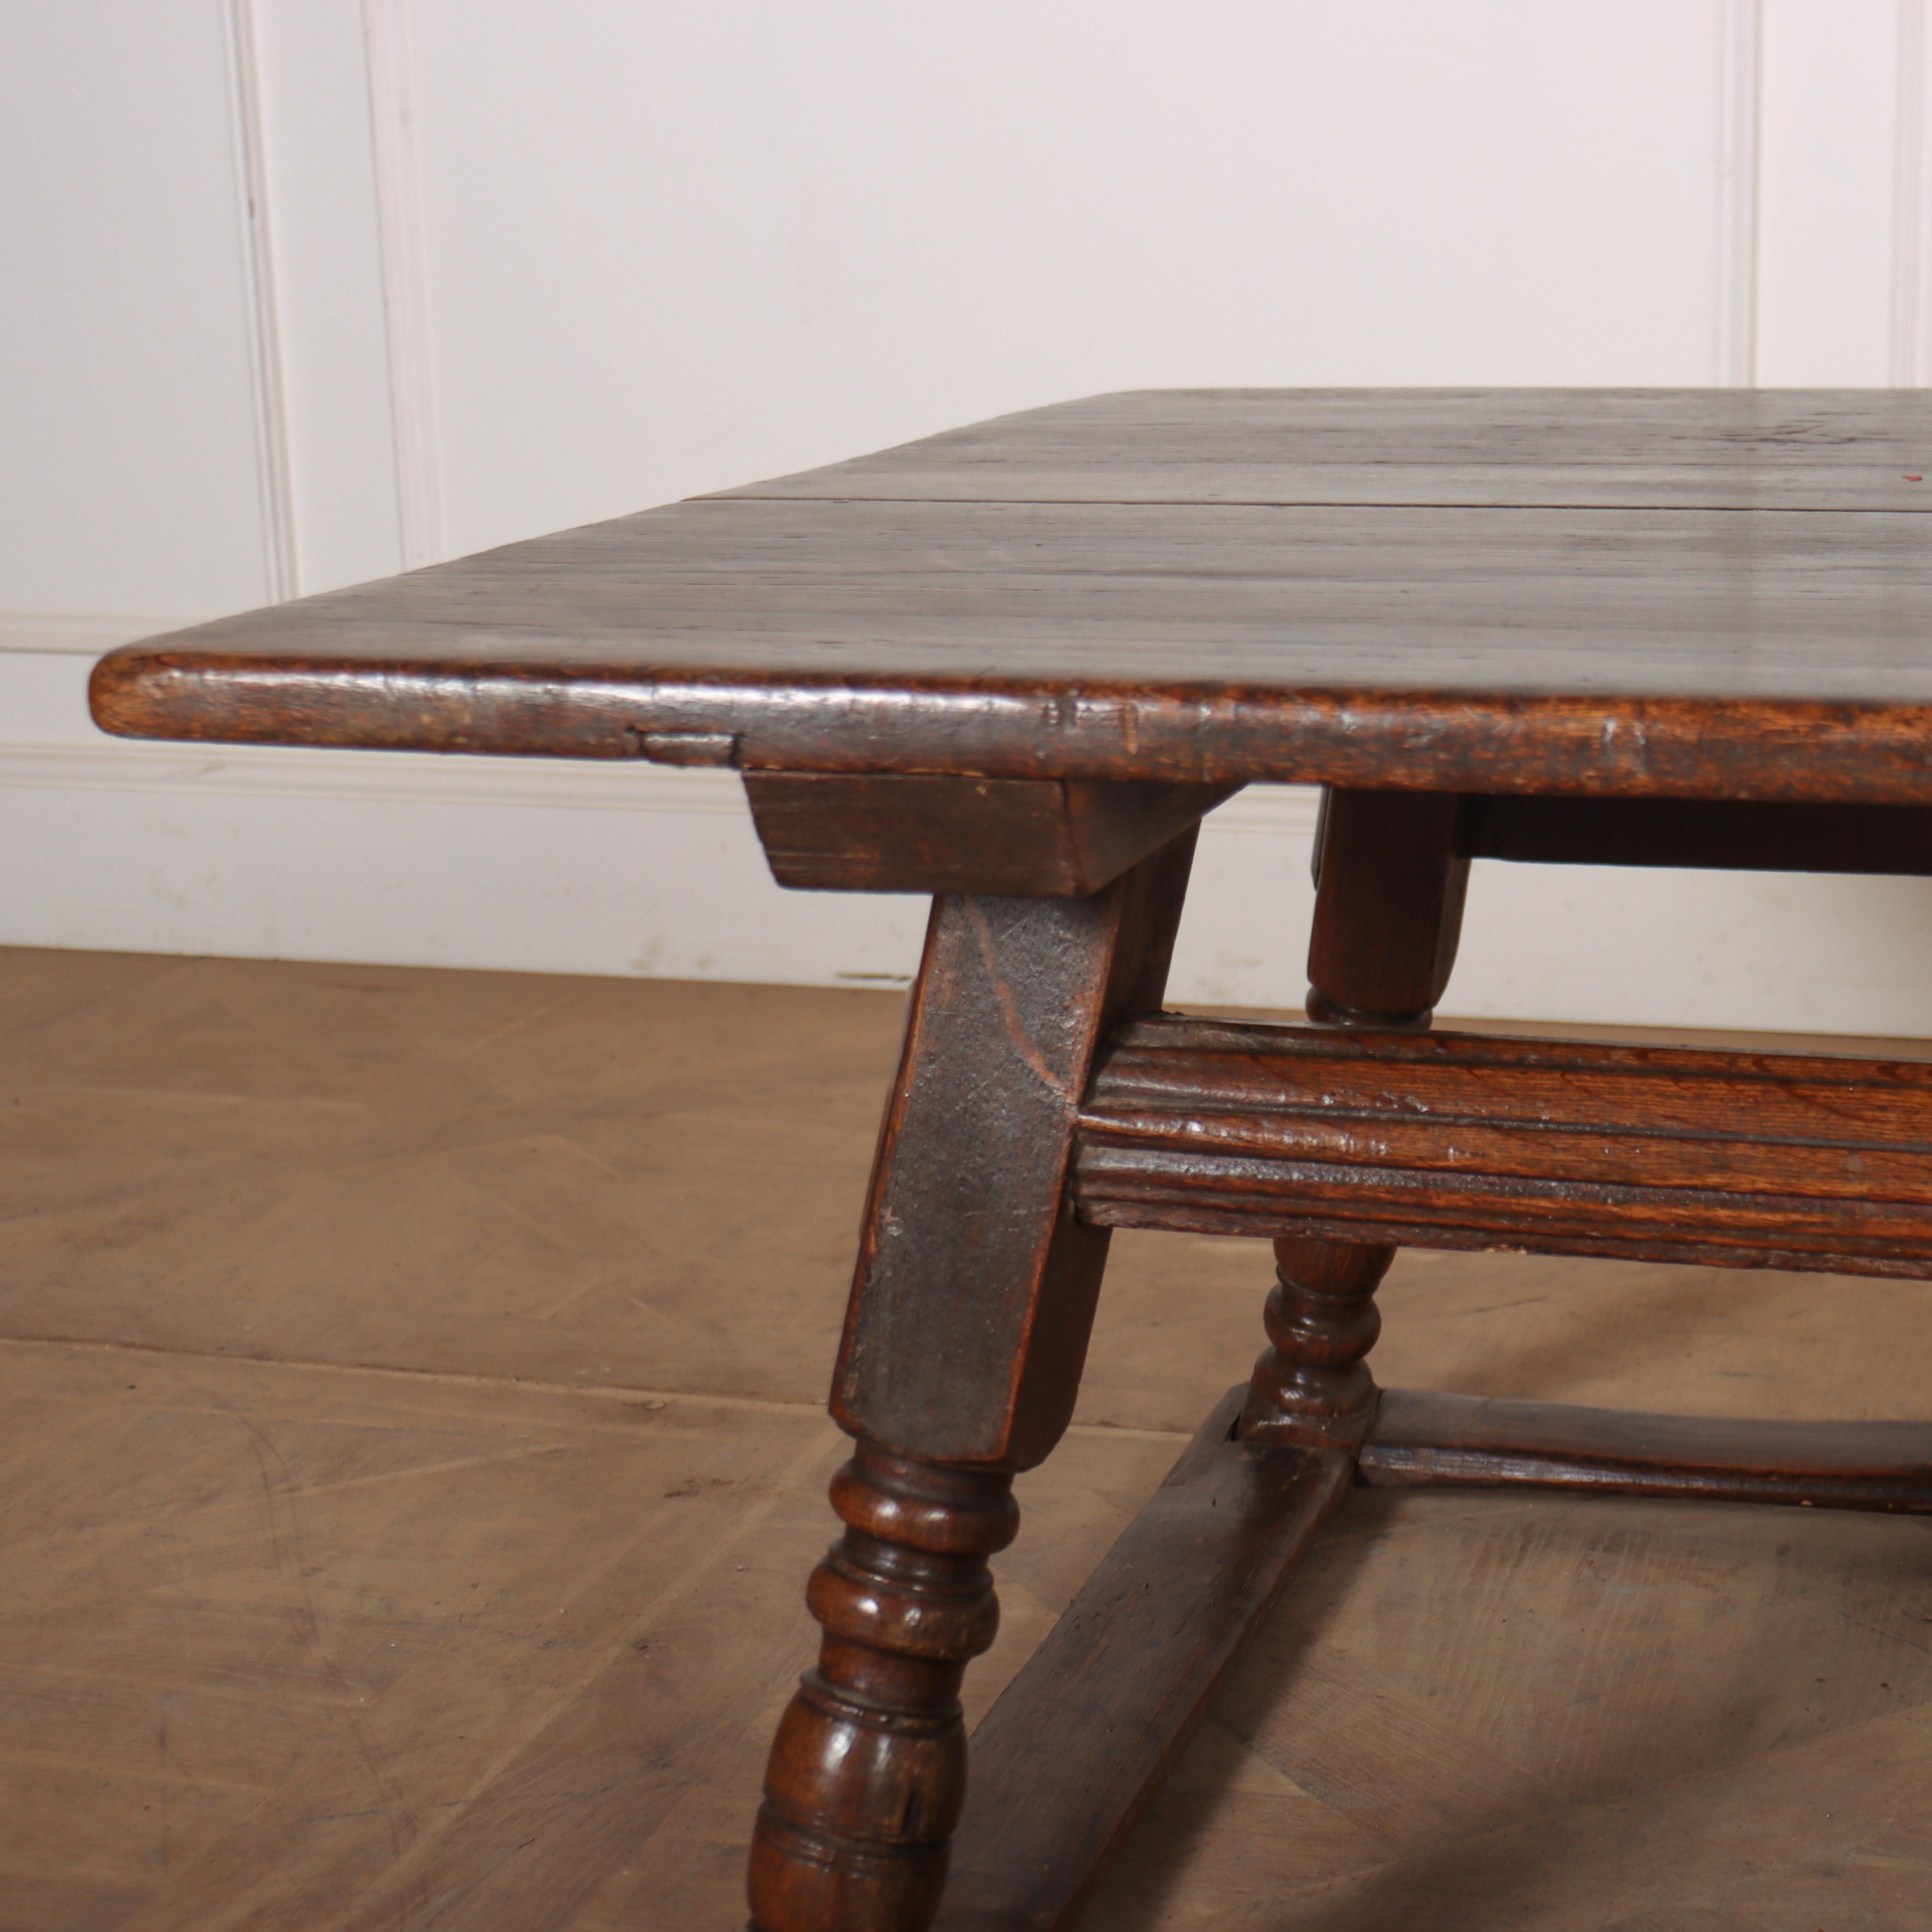 18th C Austrian oak and pine low table. 1790.

Reference: 8310

Dimensions
41.5 inches (105 cms) Wide
38.5 inches (98 cms) Deep
20 inches (51 cms) High